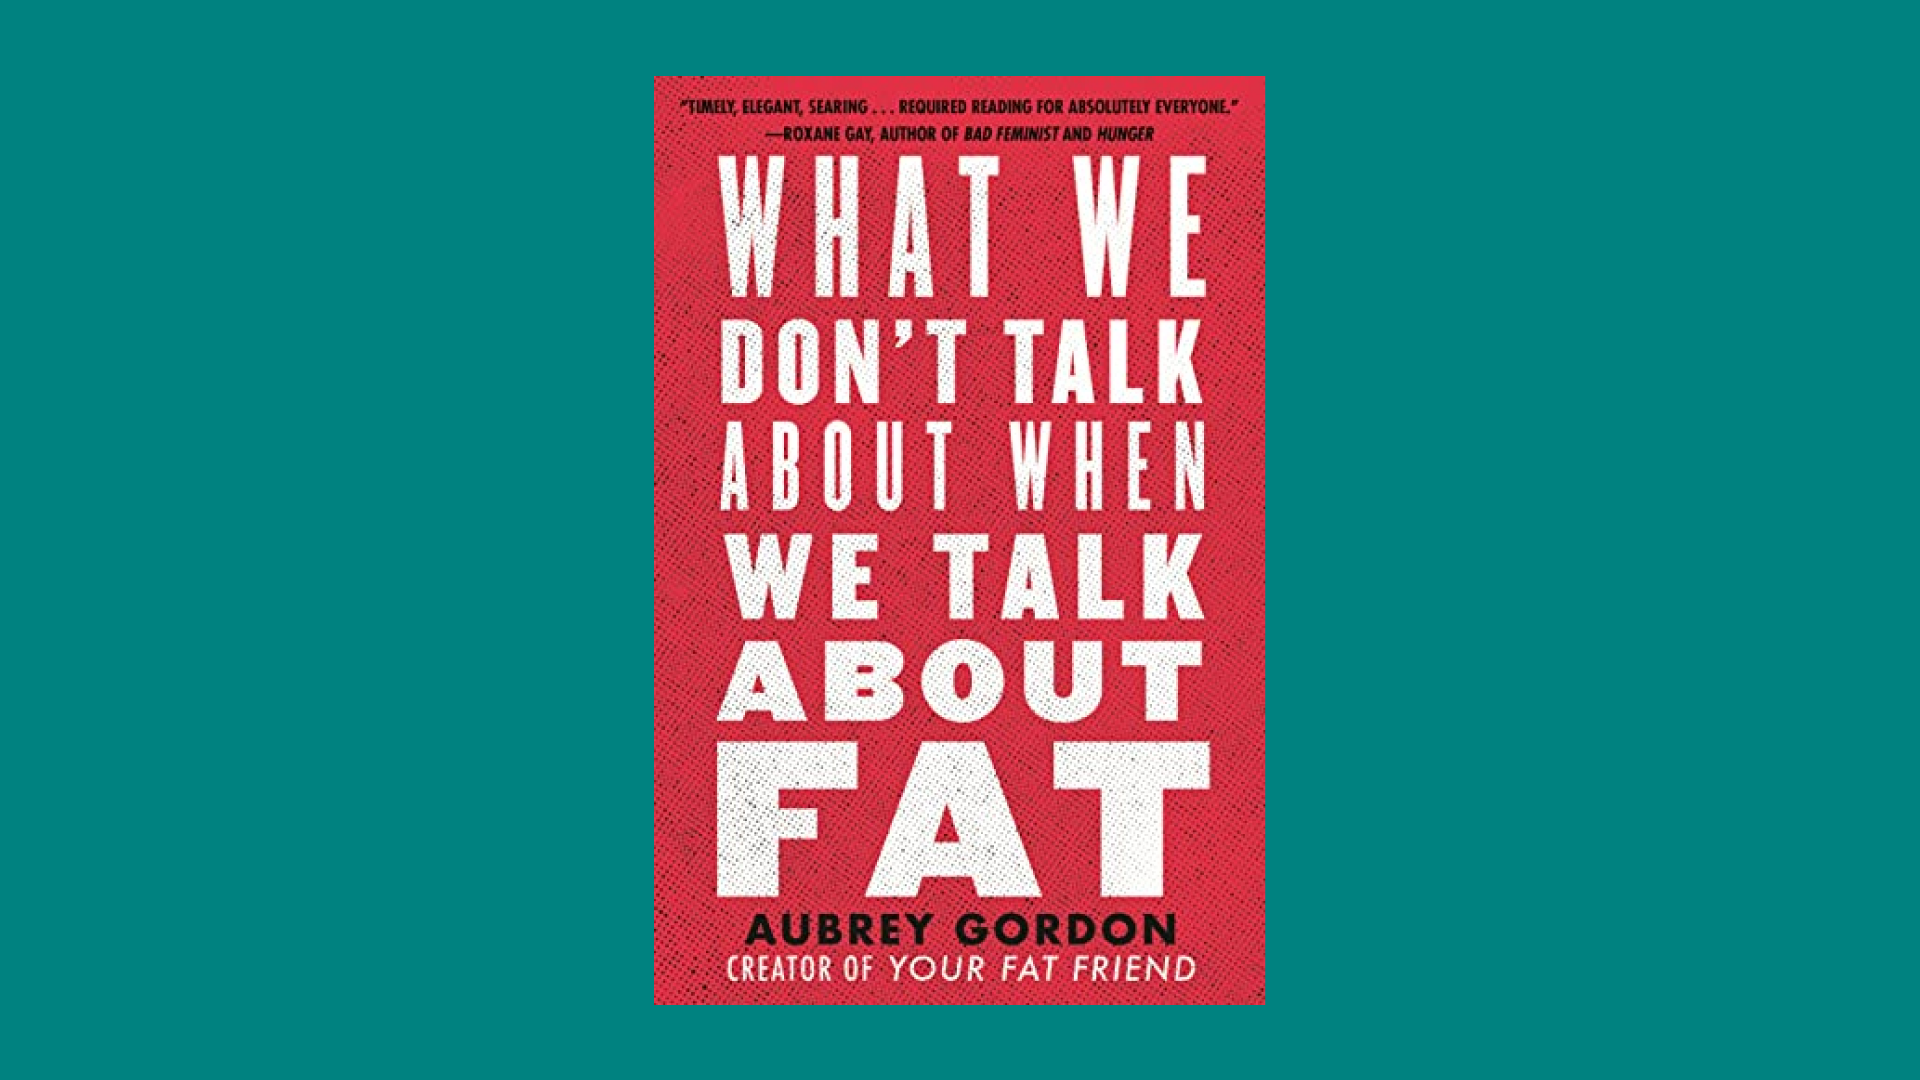 “What We Don't Talk About When We Talk About Fat” by Aubrey Gordon